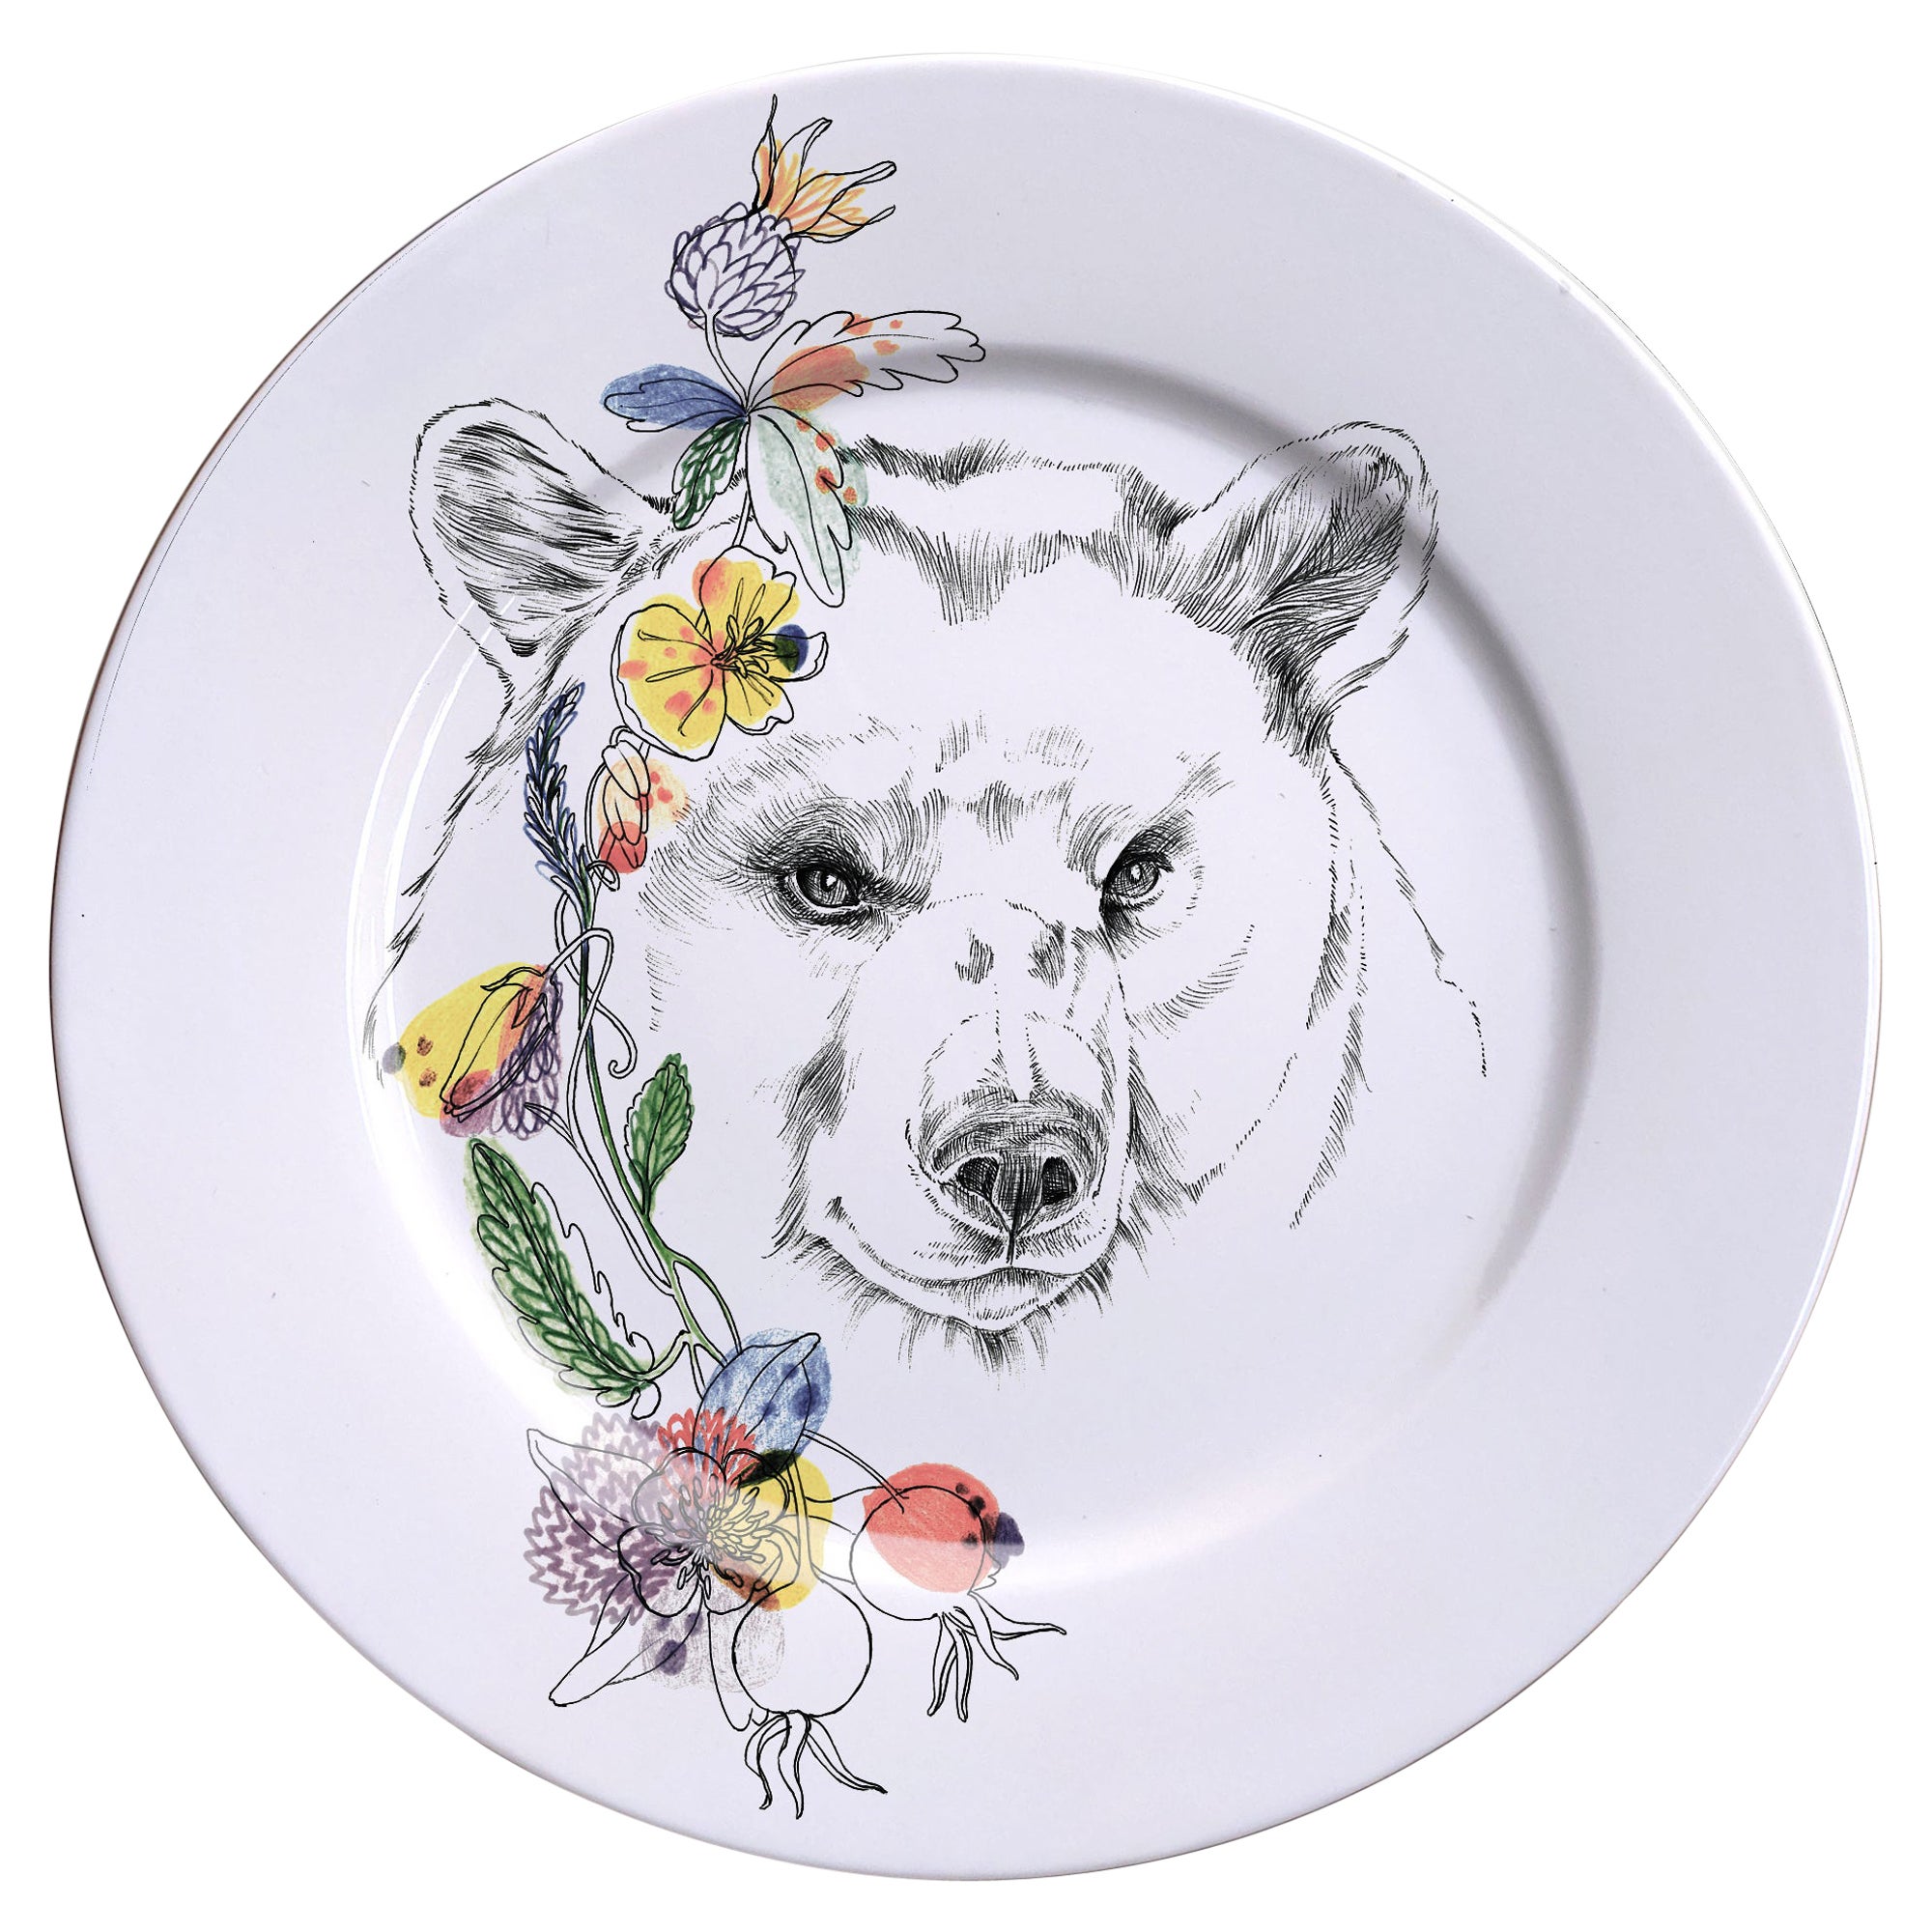 Ode to the Woods, Contemporary Porcelain Dinner Plate with Bear and Flowers